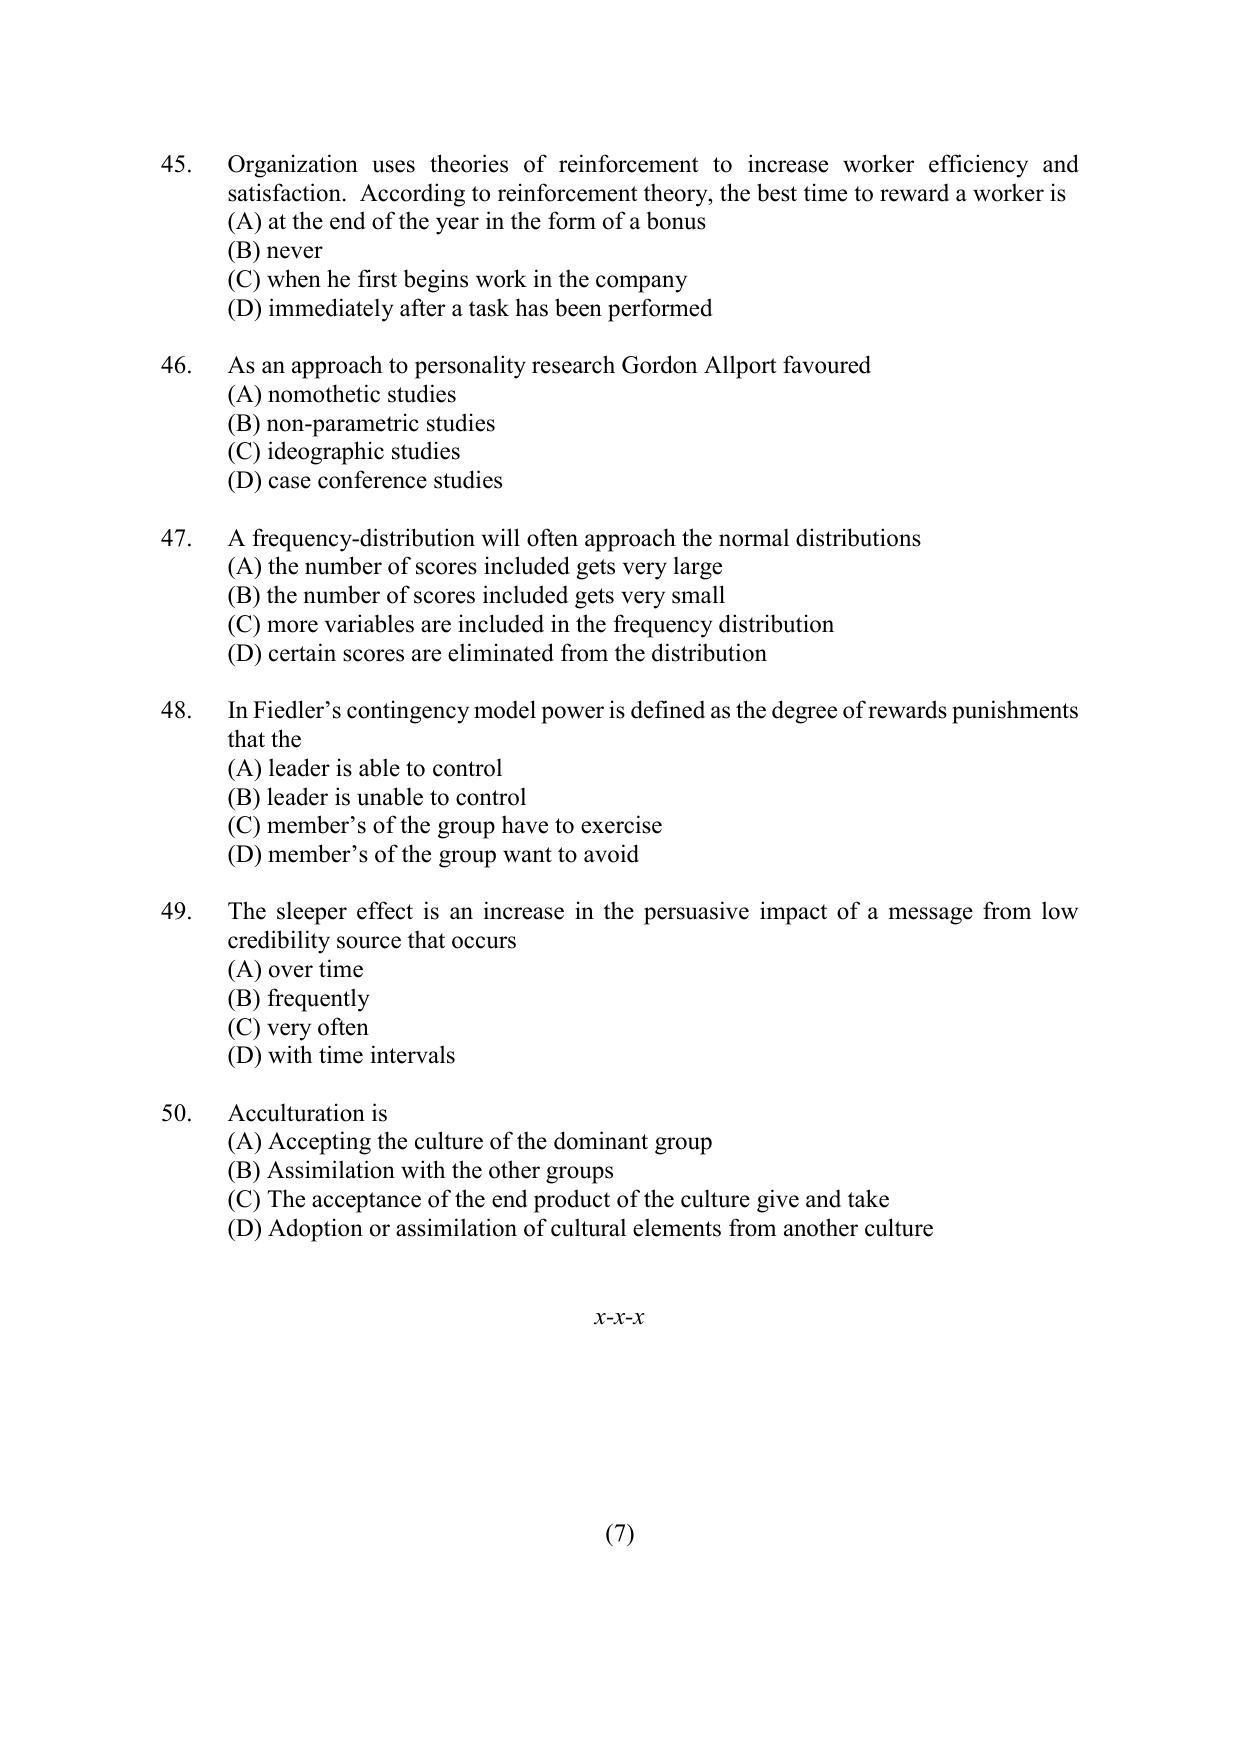 PU MPET Ancient Indian History & Archeology 2022 Question Papers - Page 38